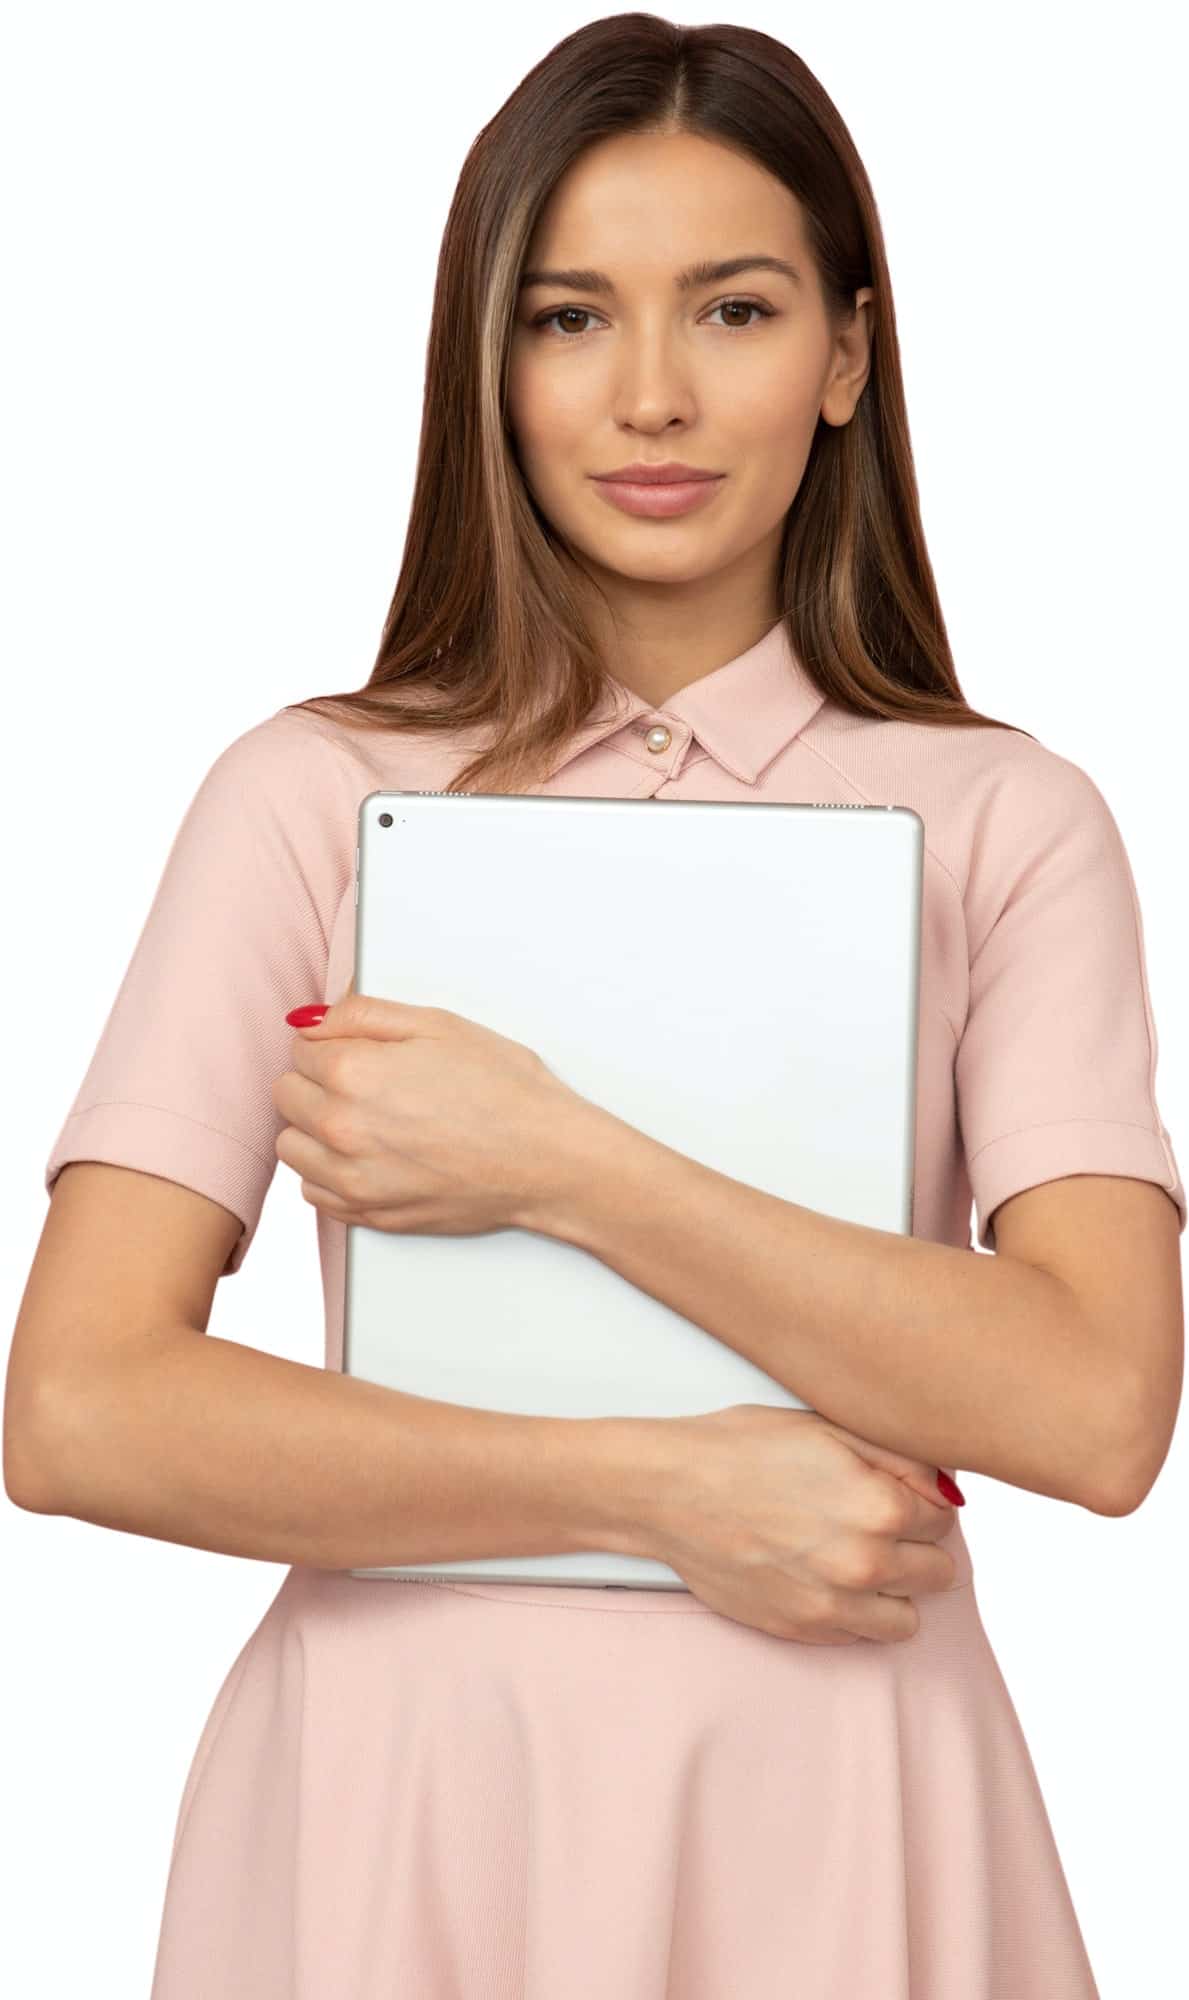 a woman in a pink dress holding a white ipad